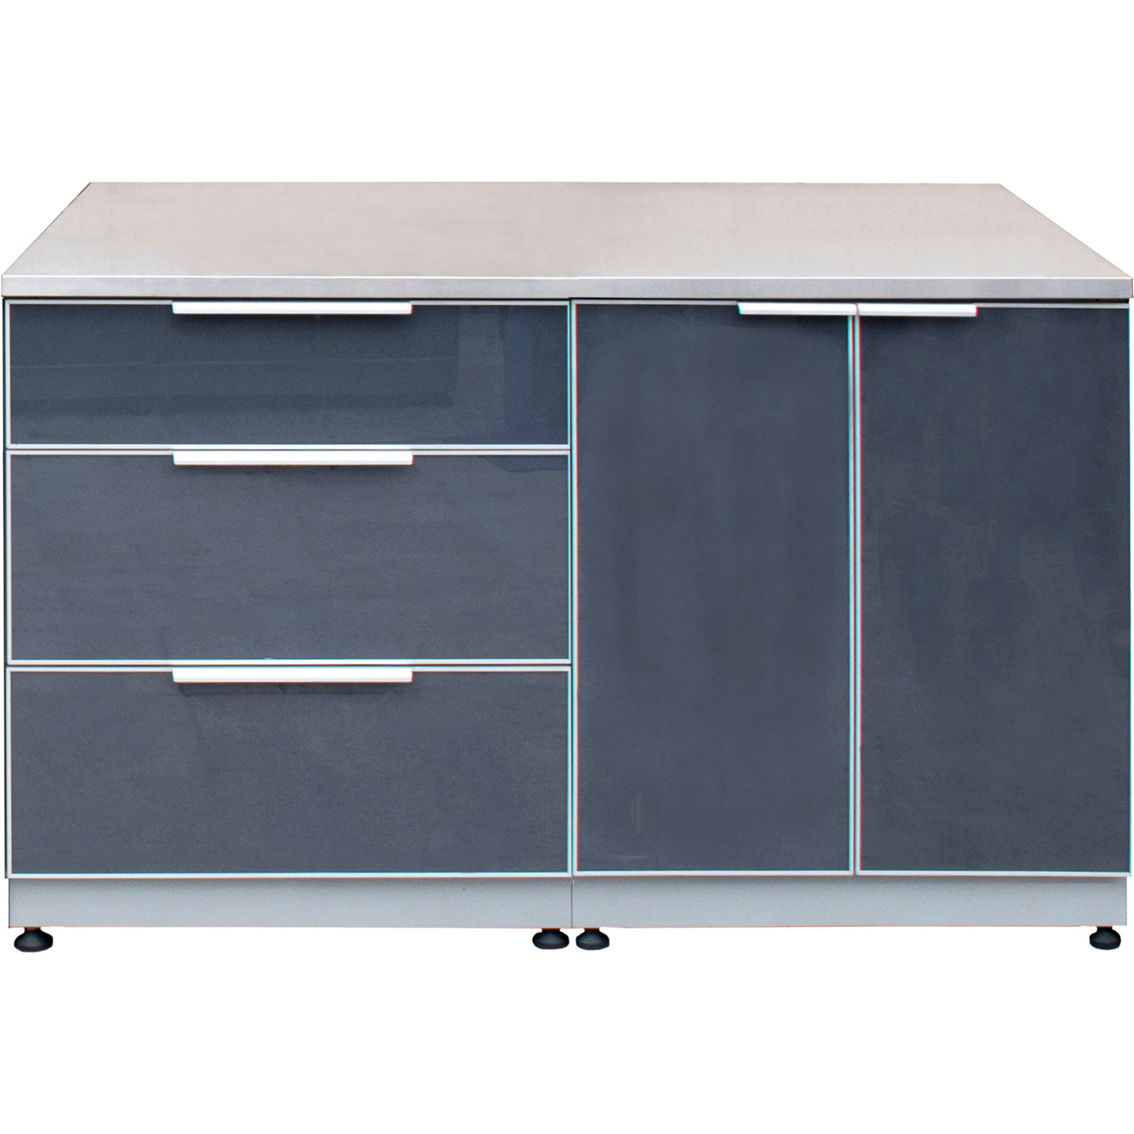 Blue Sky Outdoor Living Double Extended Stainless Steel Countertop - Image 2 of 9